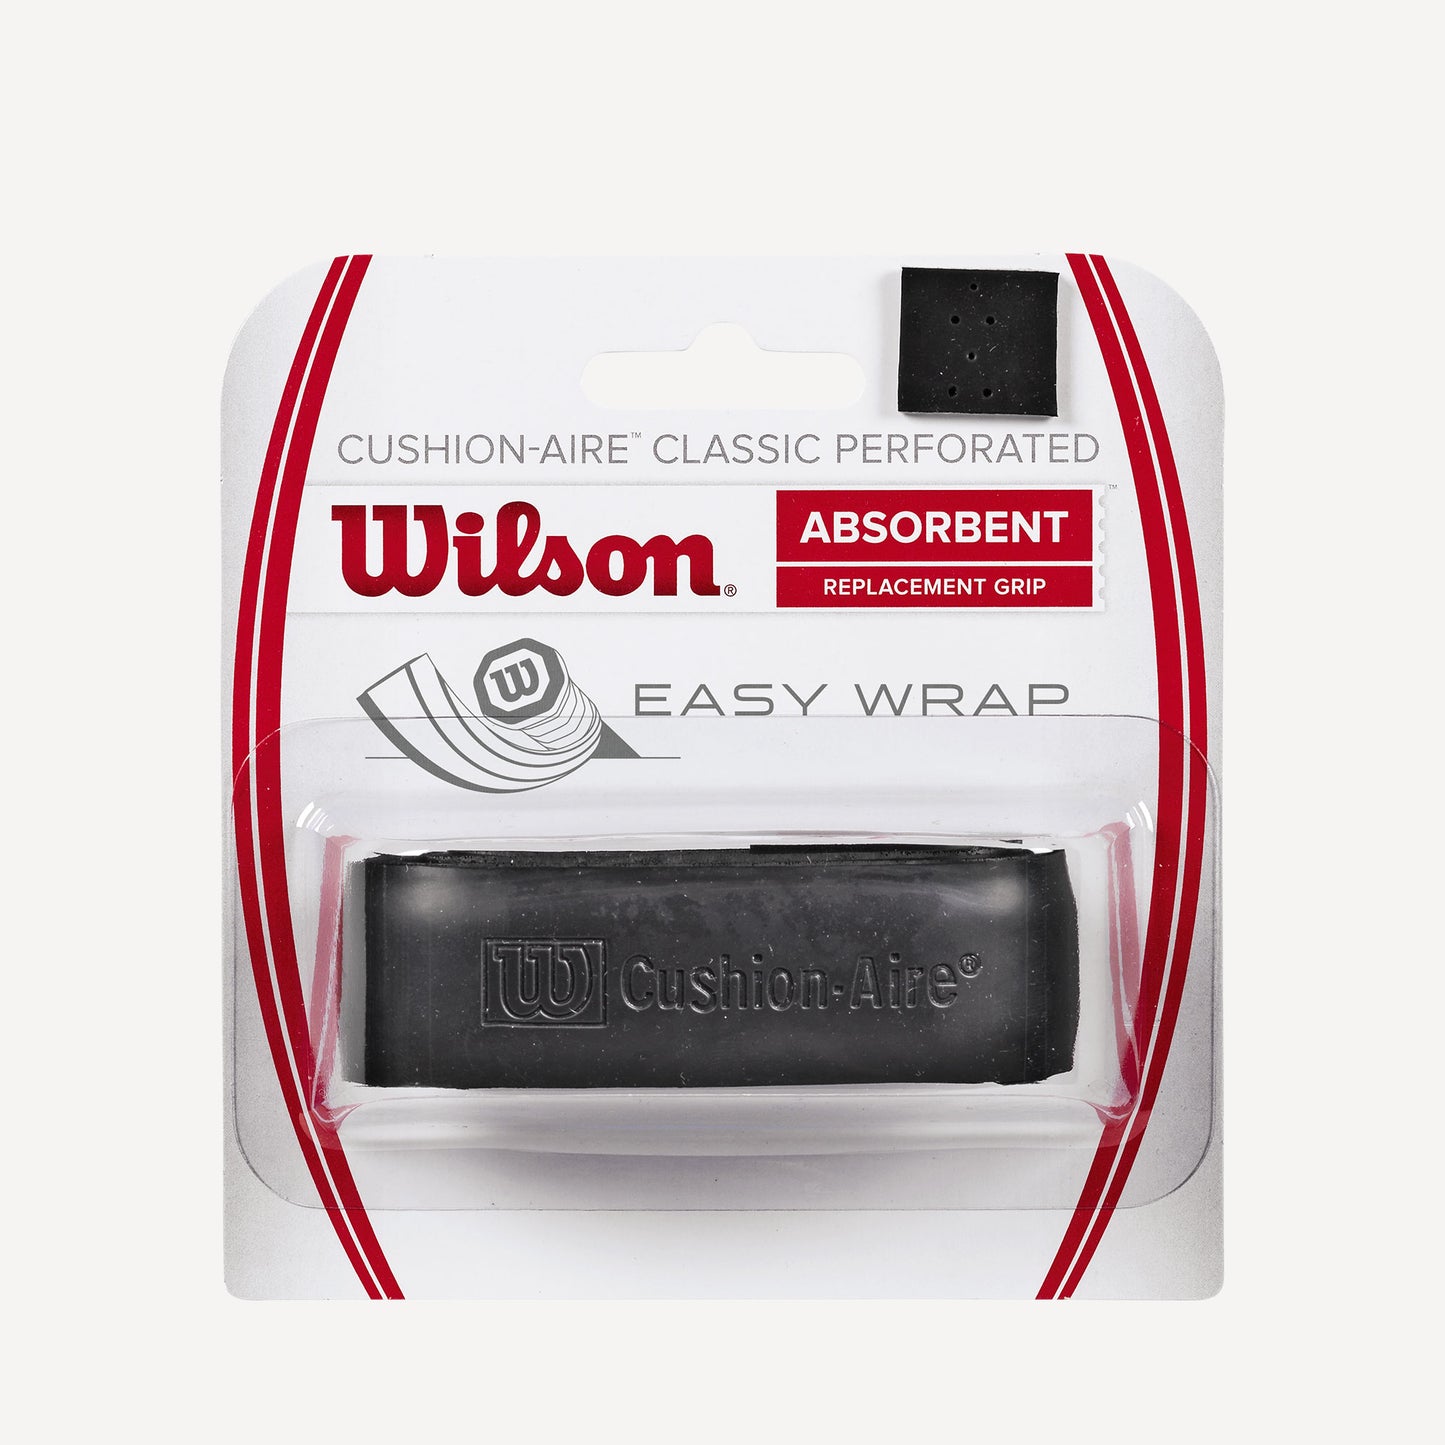 Wilson Cushion-Aire Perforated Tennis Replacement Grip 1